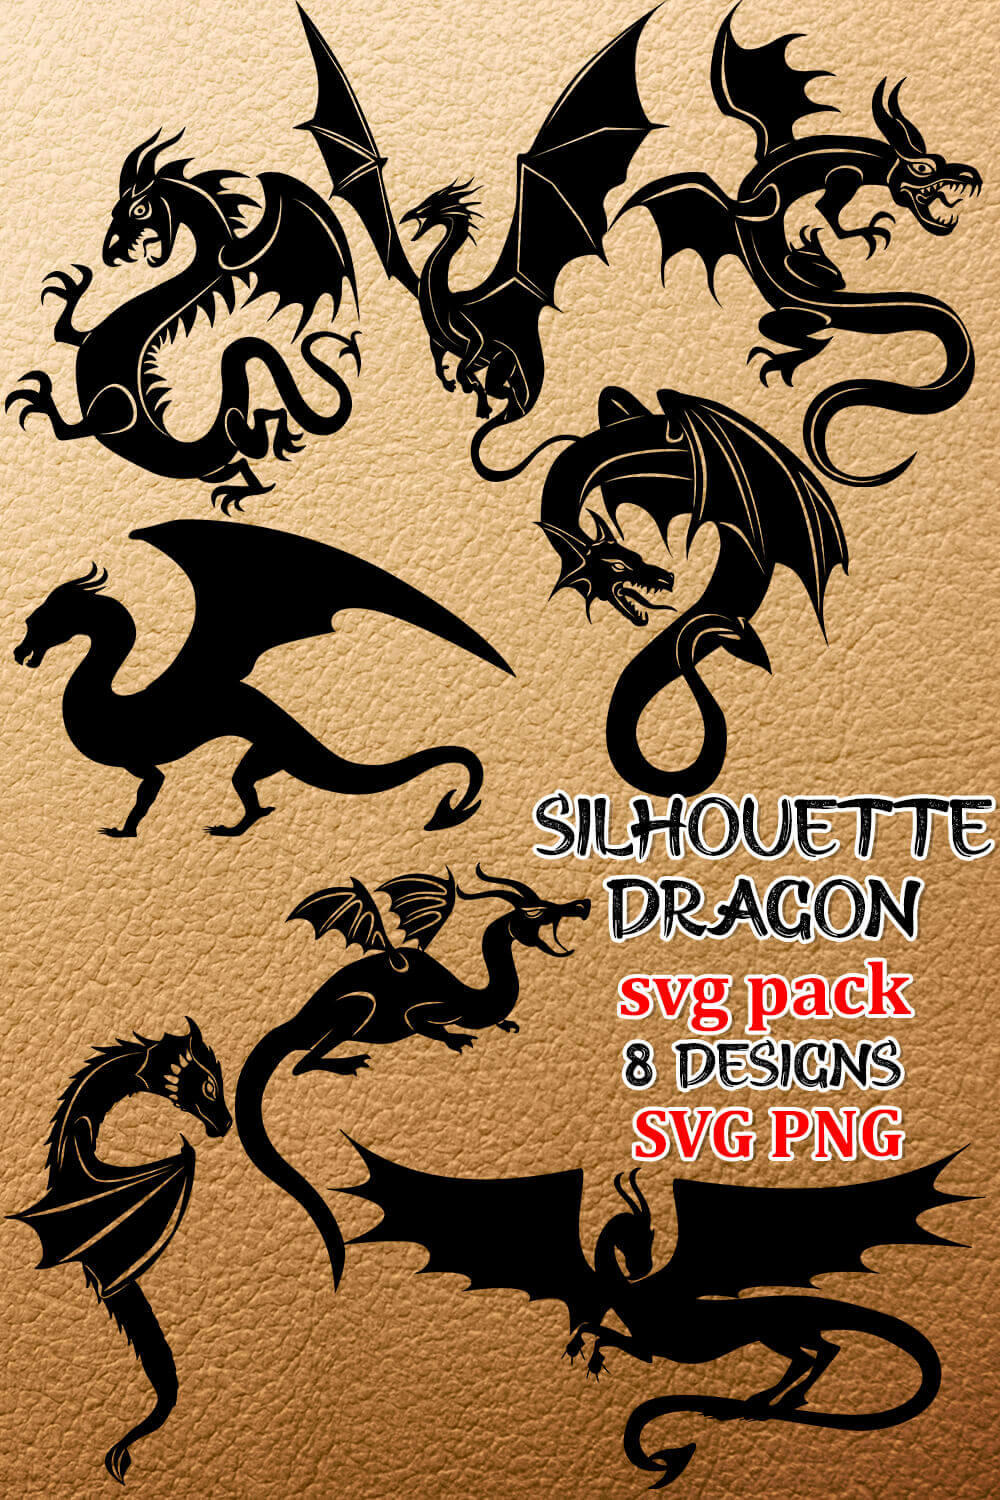 8 Designs of Silhouette dragon SVG pack.